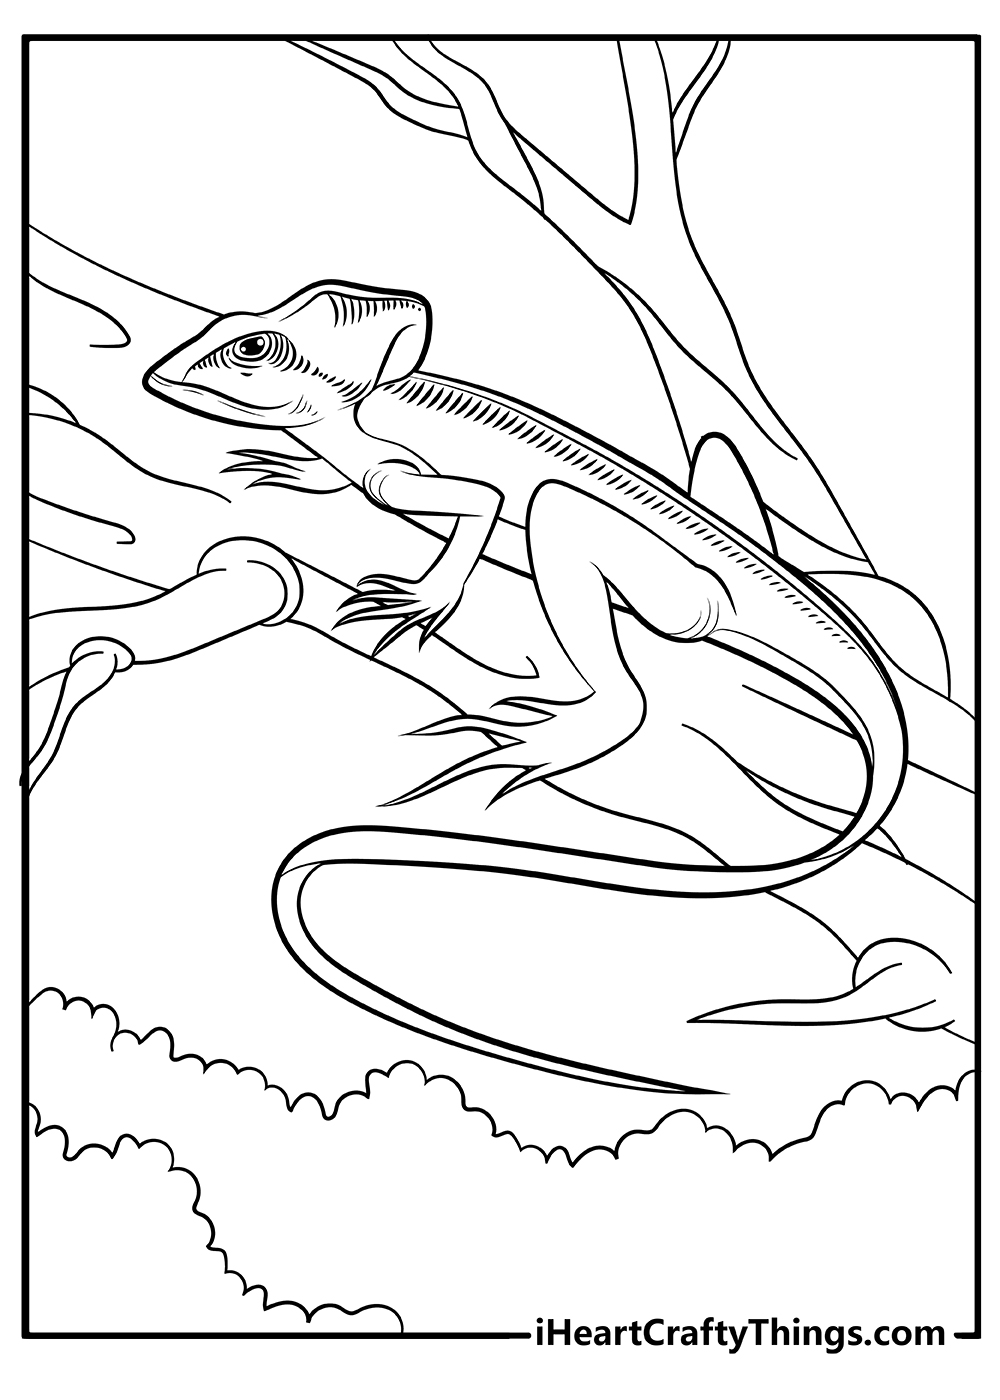 Lizard coloring pages free printables